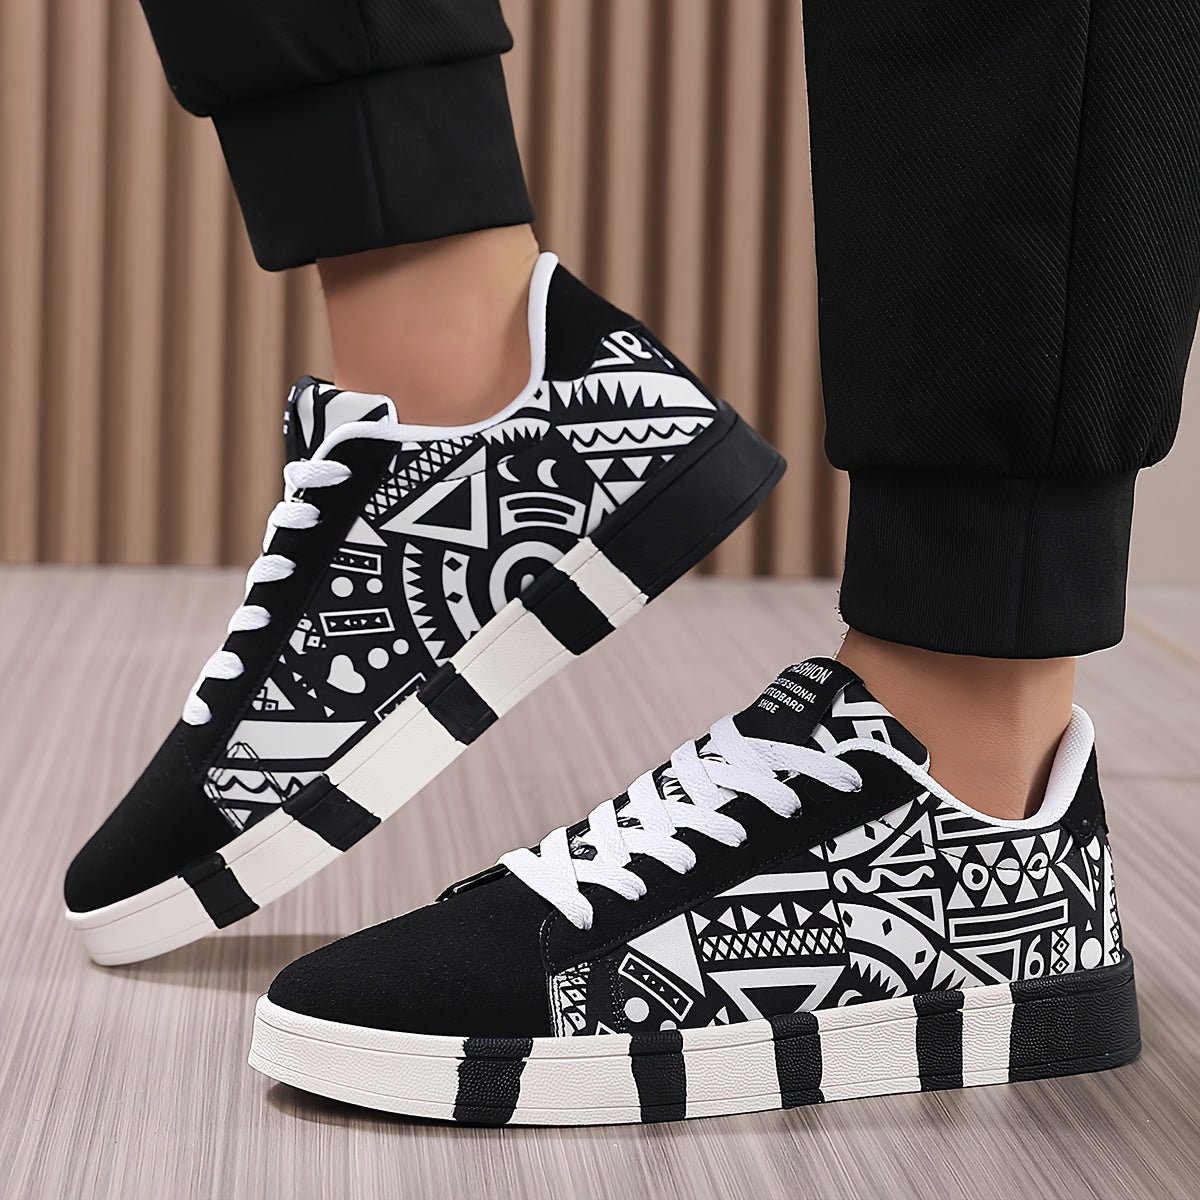 Men's Trendy Skate Shoes, Comfy Non Slip Casual Style Sneakers For Men's Outdoor Activities